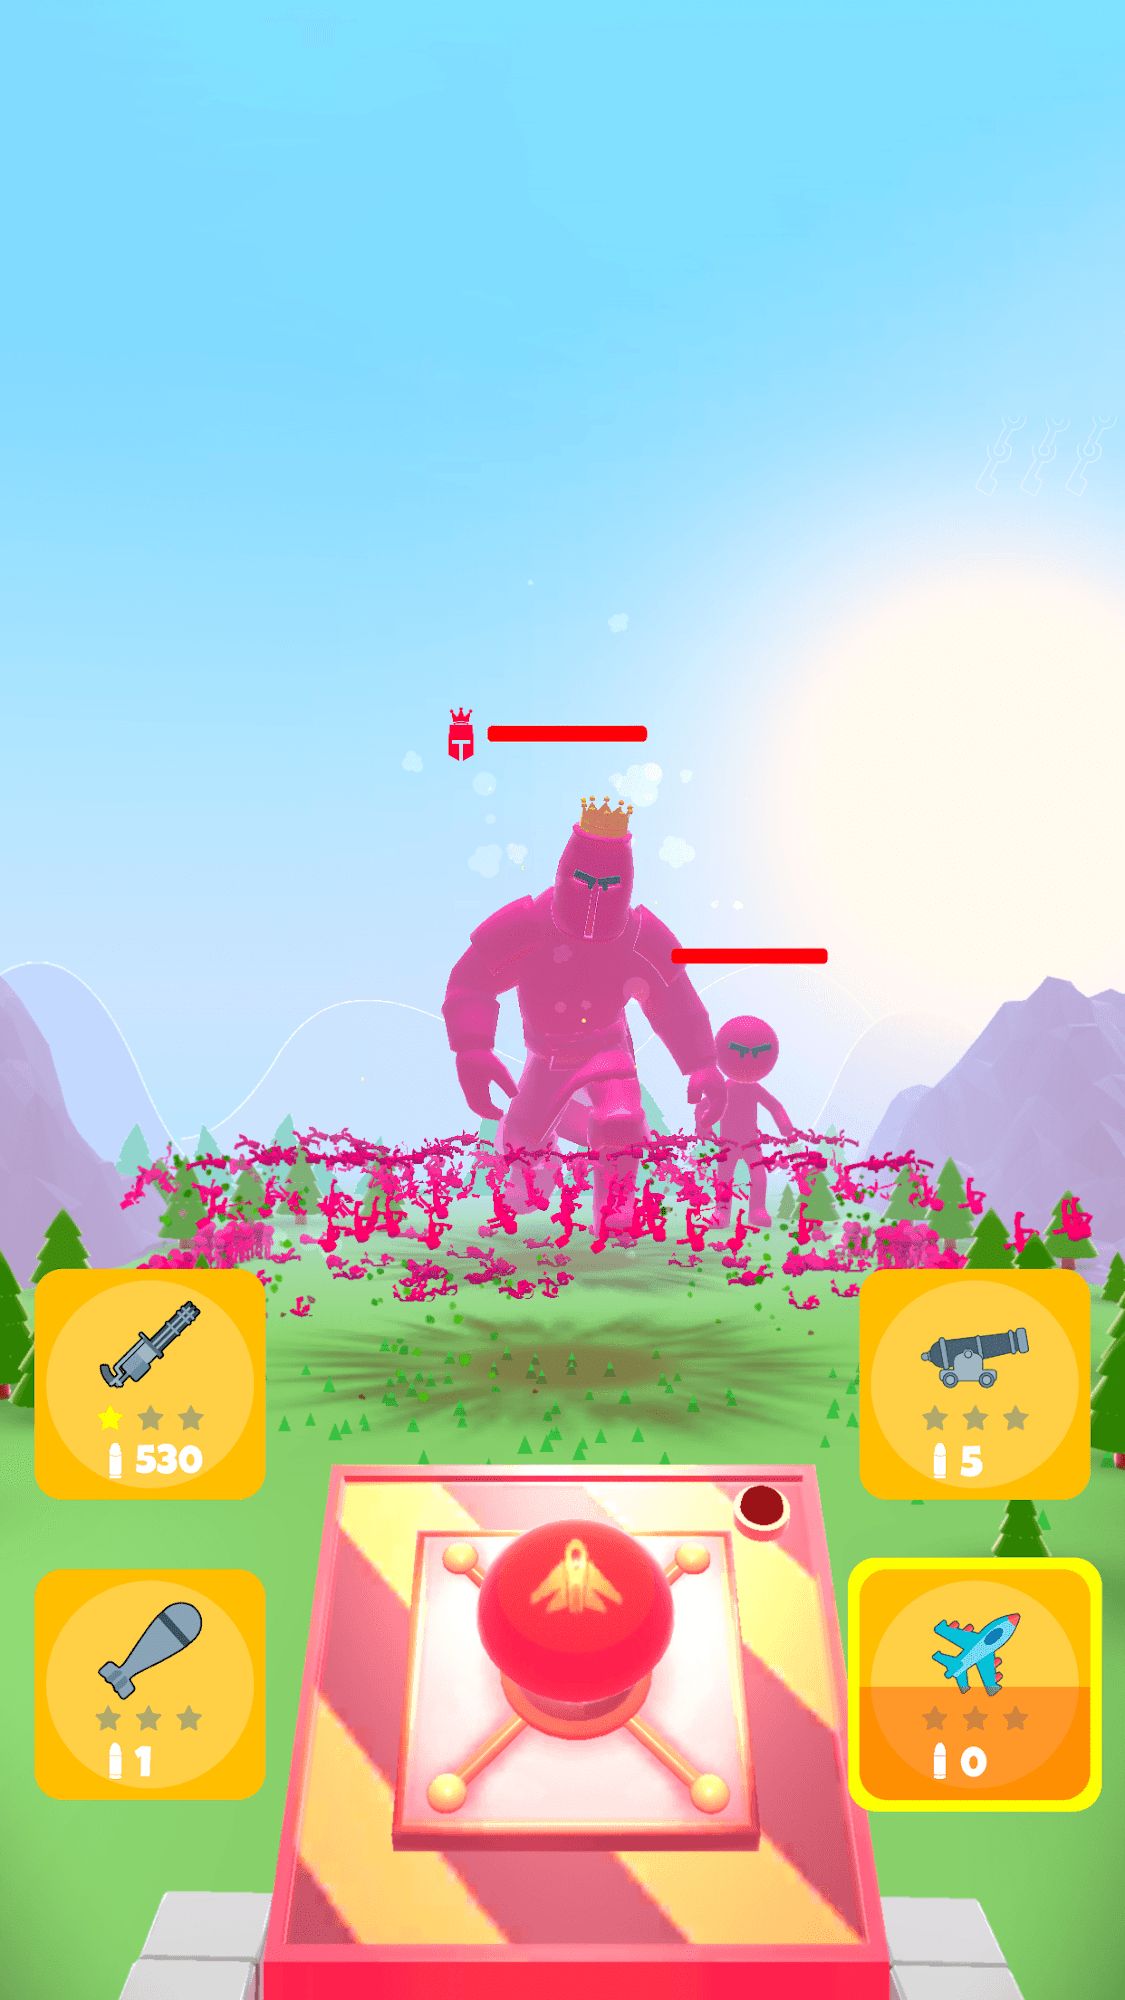 Crowd Defense - Android game screenshots.